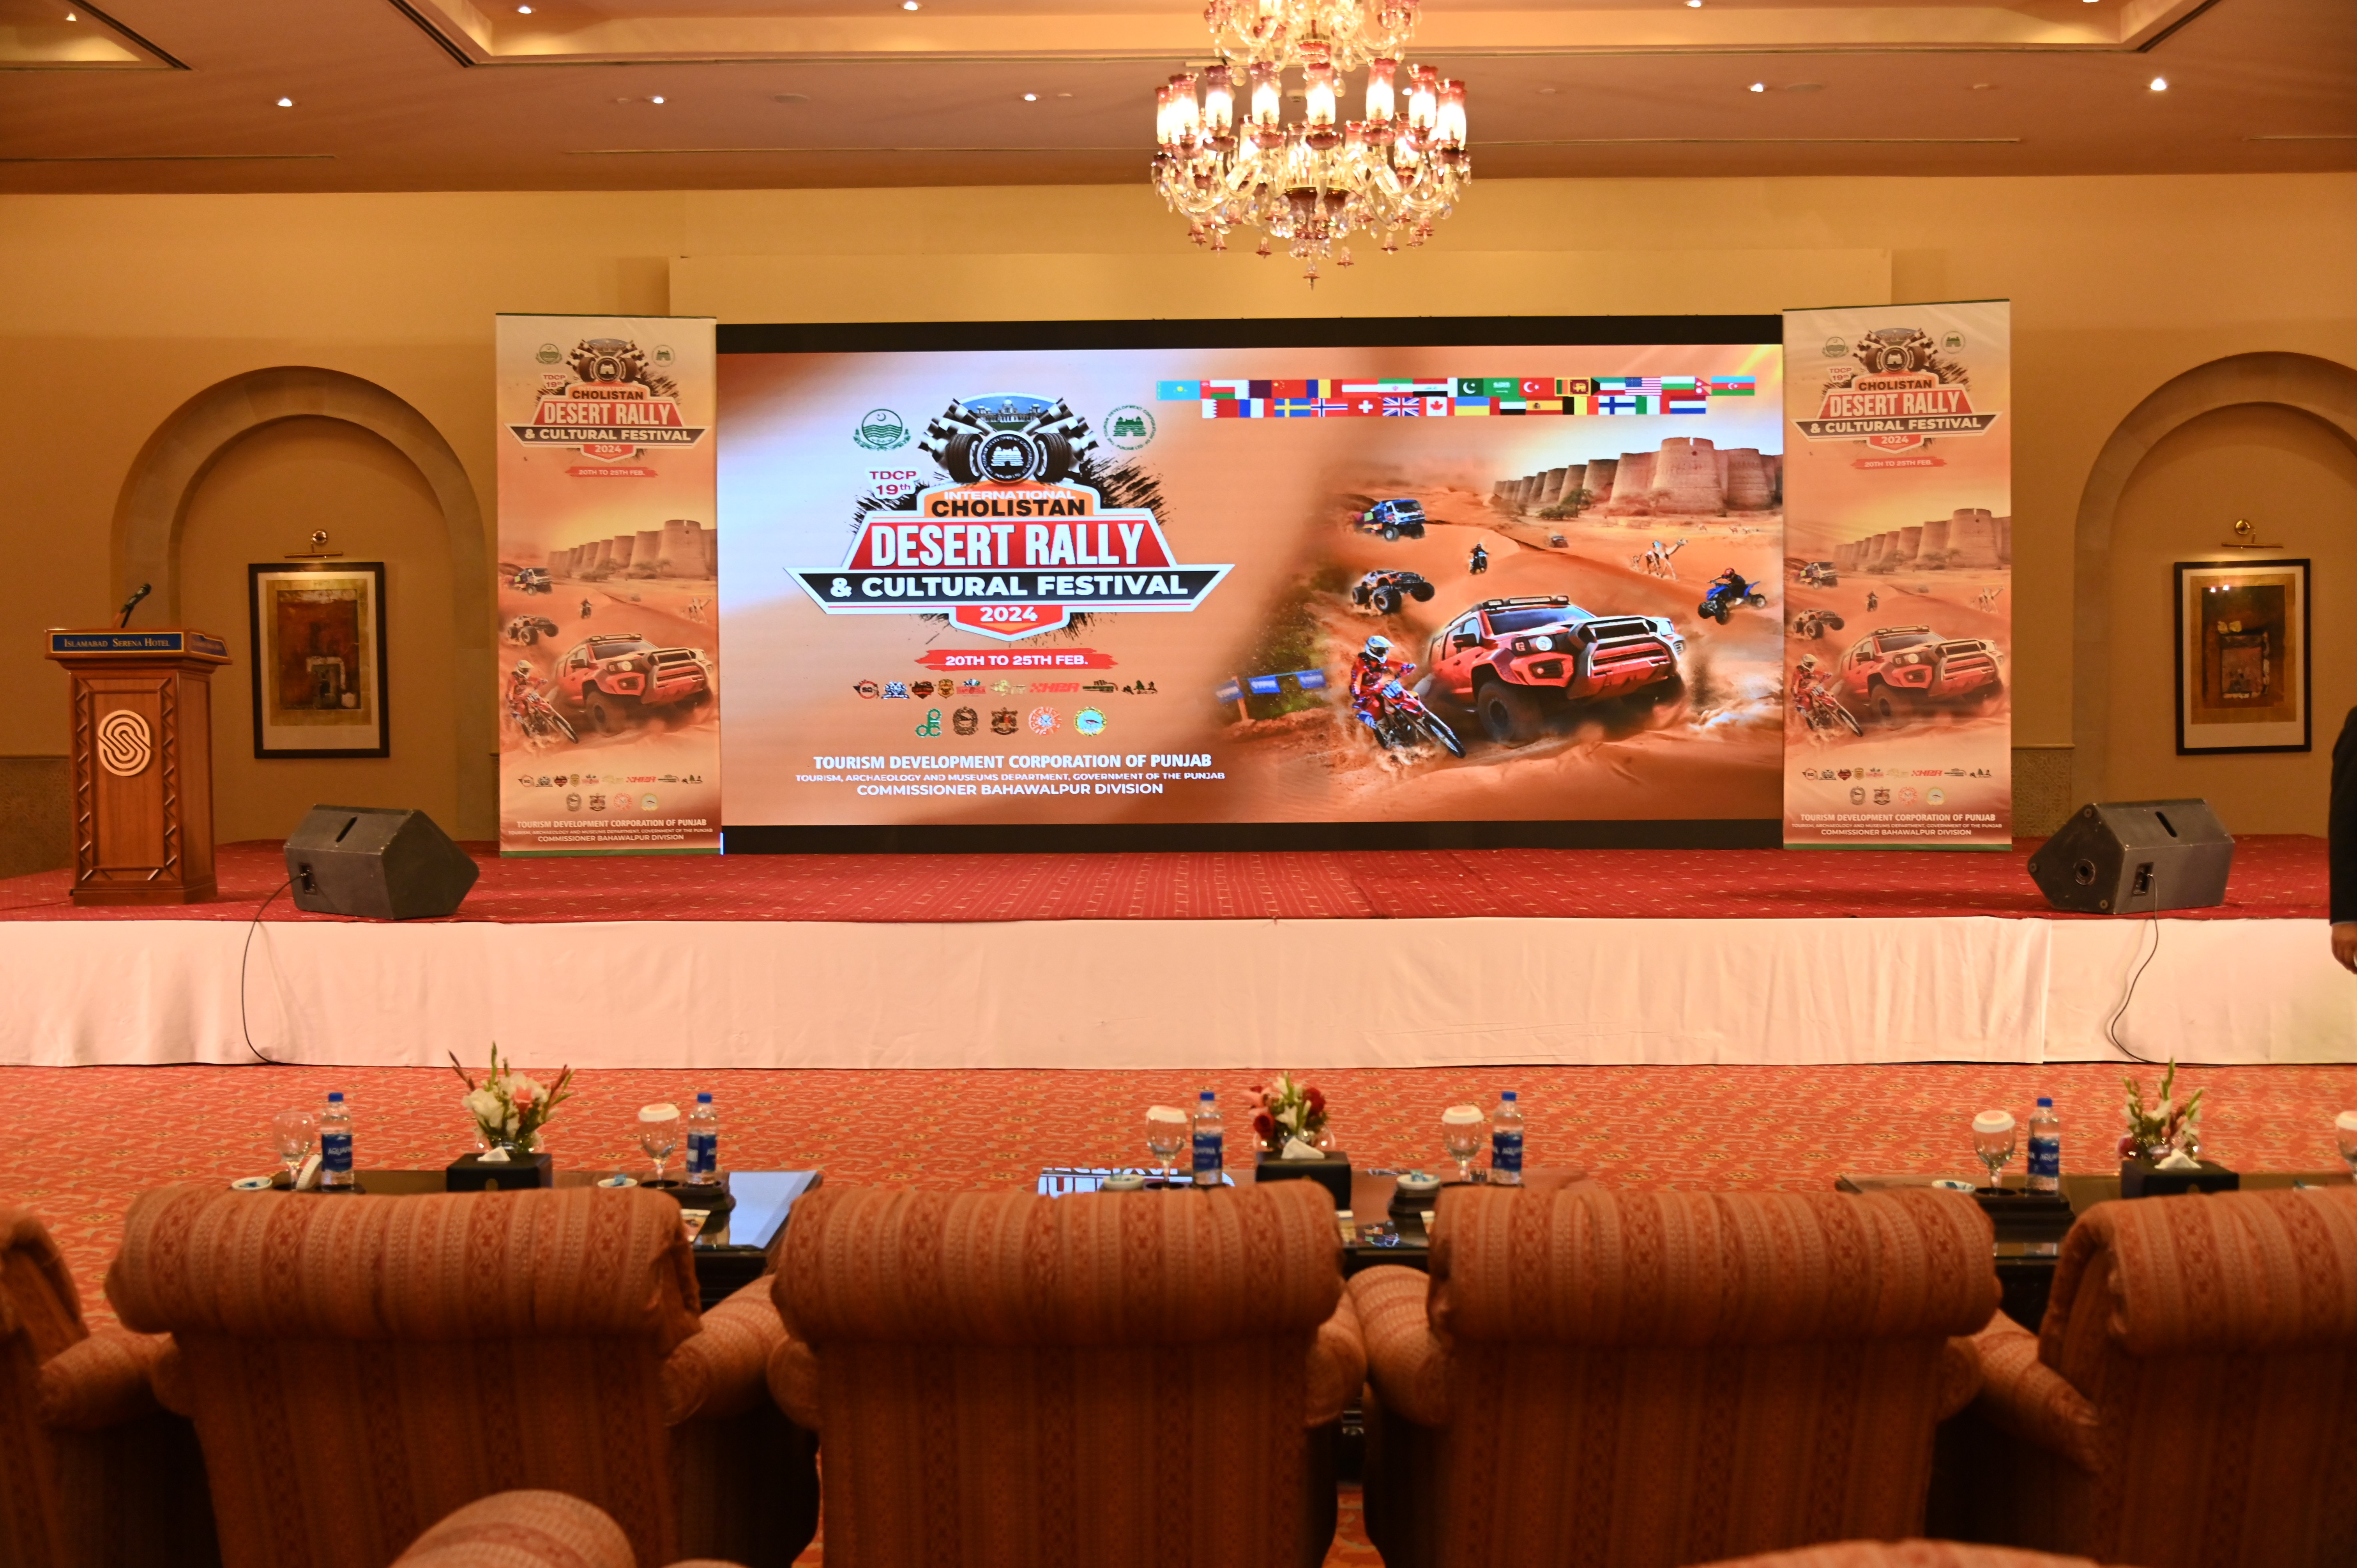 A stage set for the opening of The Cholistan Desert Rally & Cultural Festival 2024 organized by the Tourism Development Corporation of Punjab